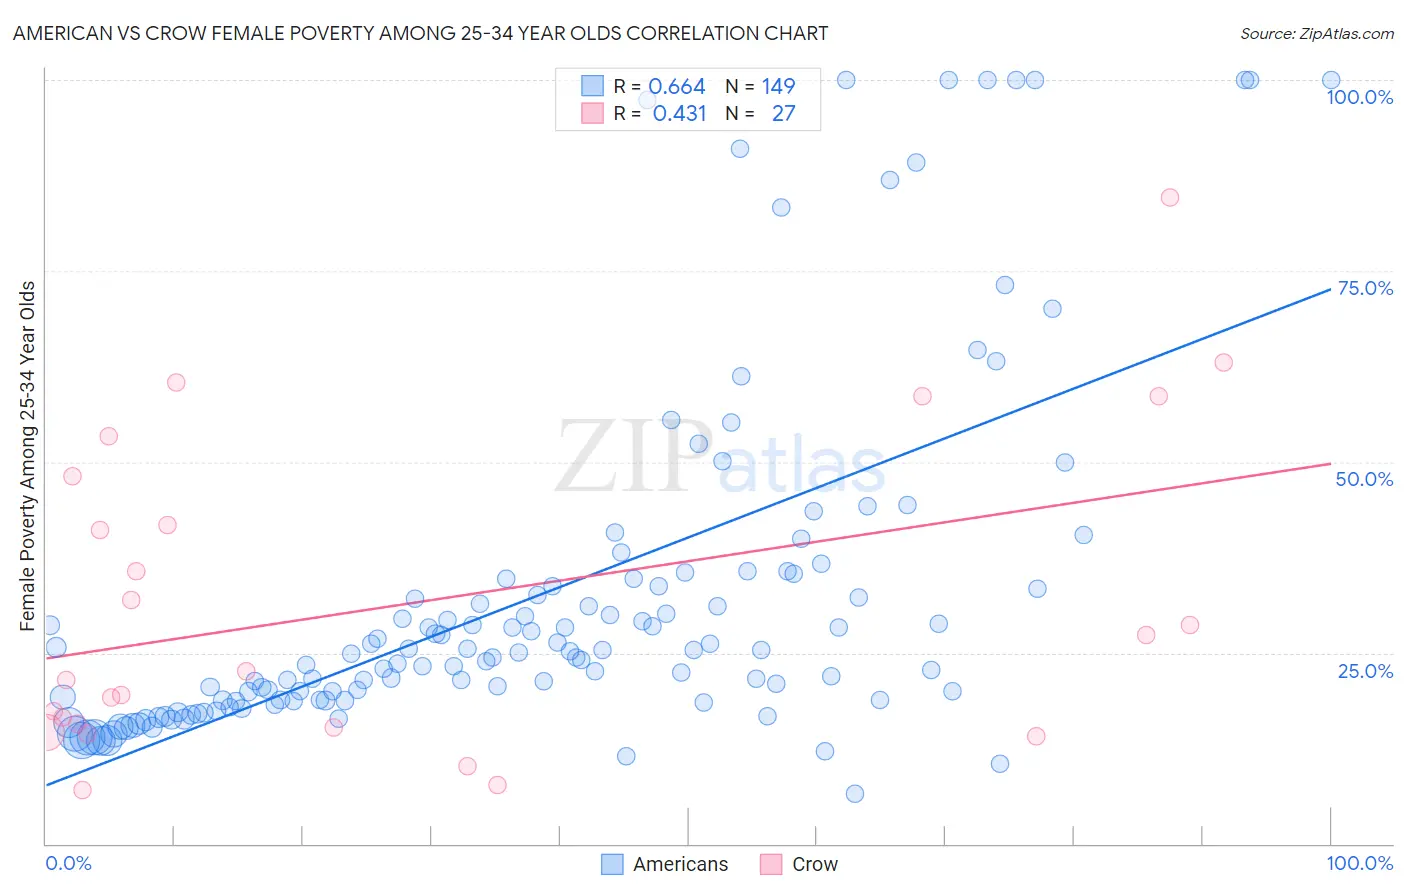 American vs Crow Female Poverty Among 25-34 Year Olds